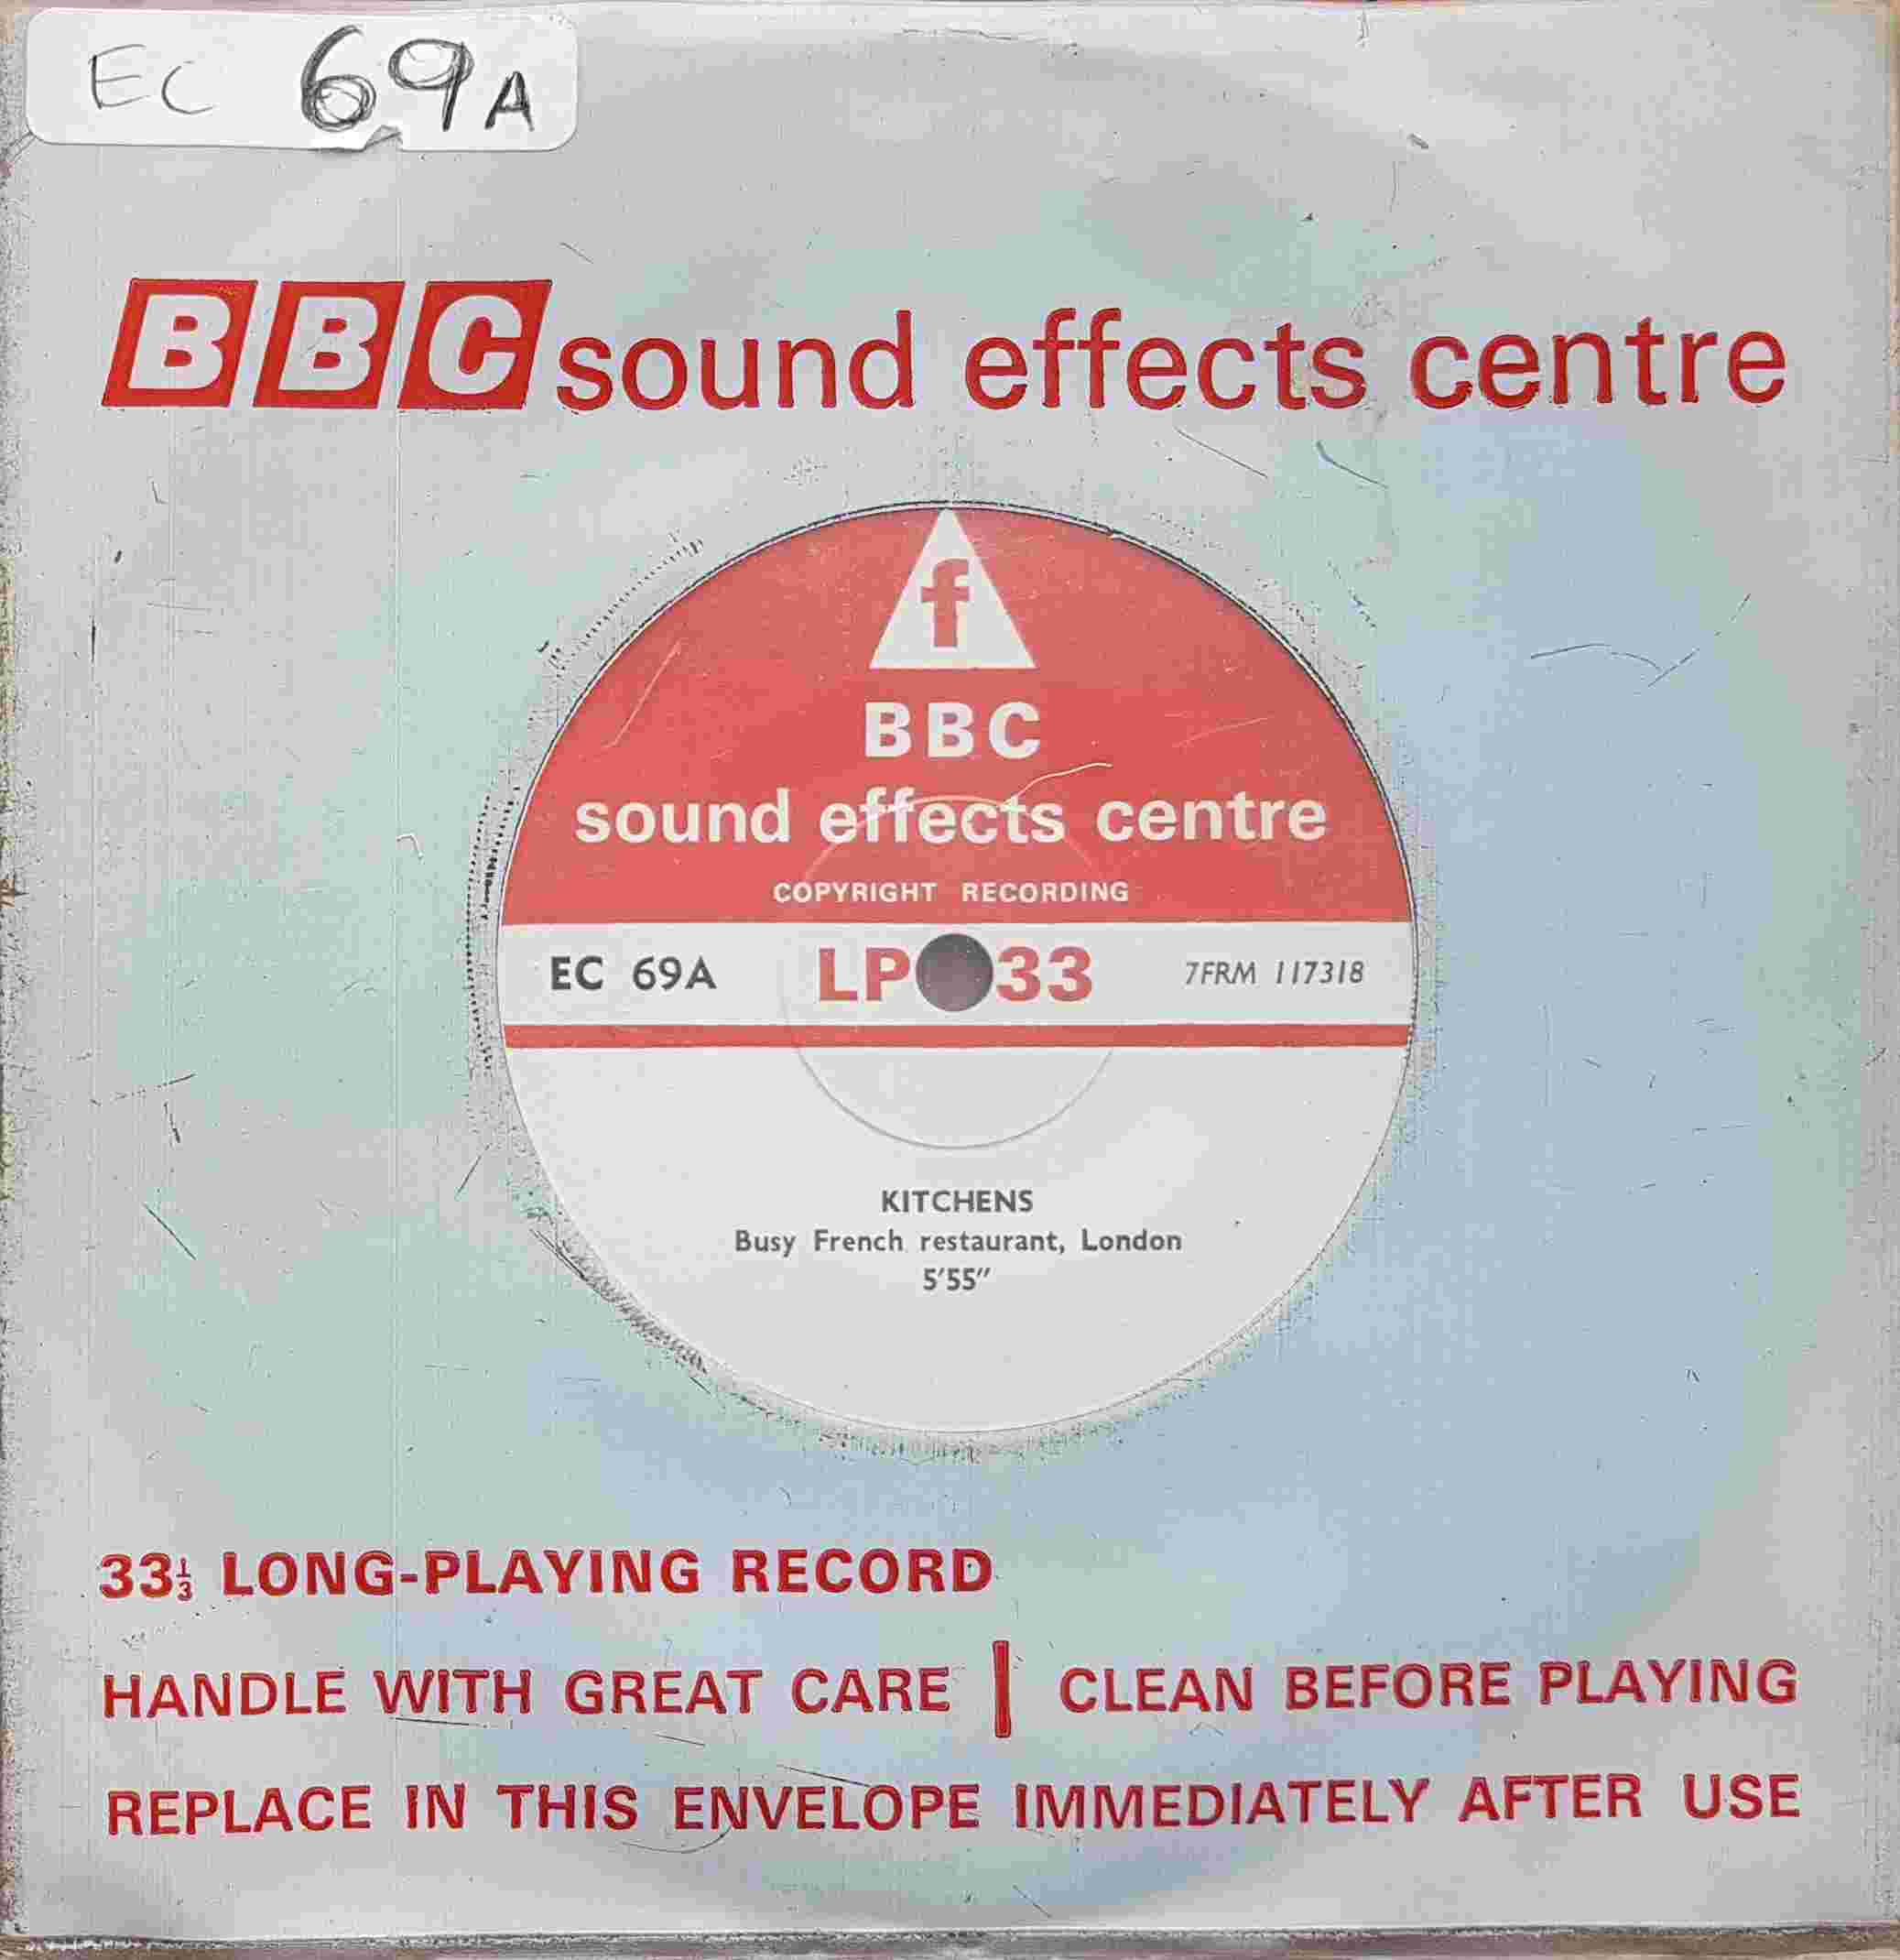 Picture of EC 69A Kitchens by artist Not registered from the BBC records and Tapes library